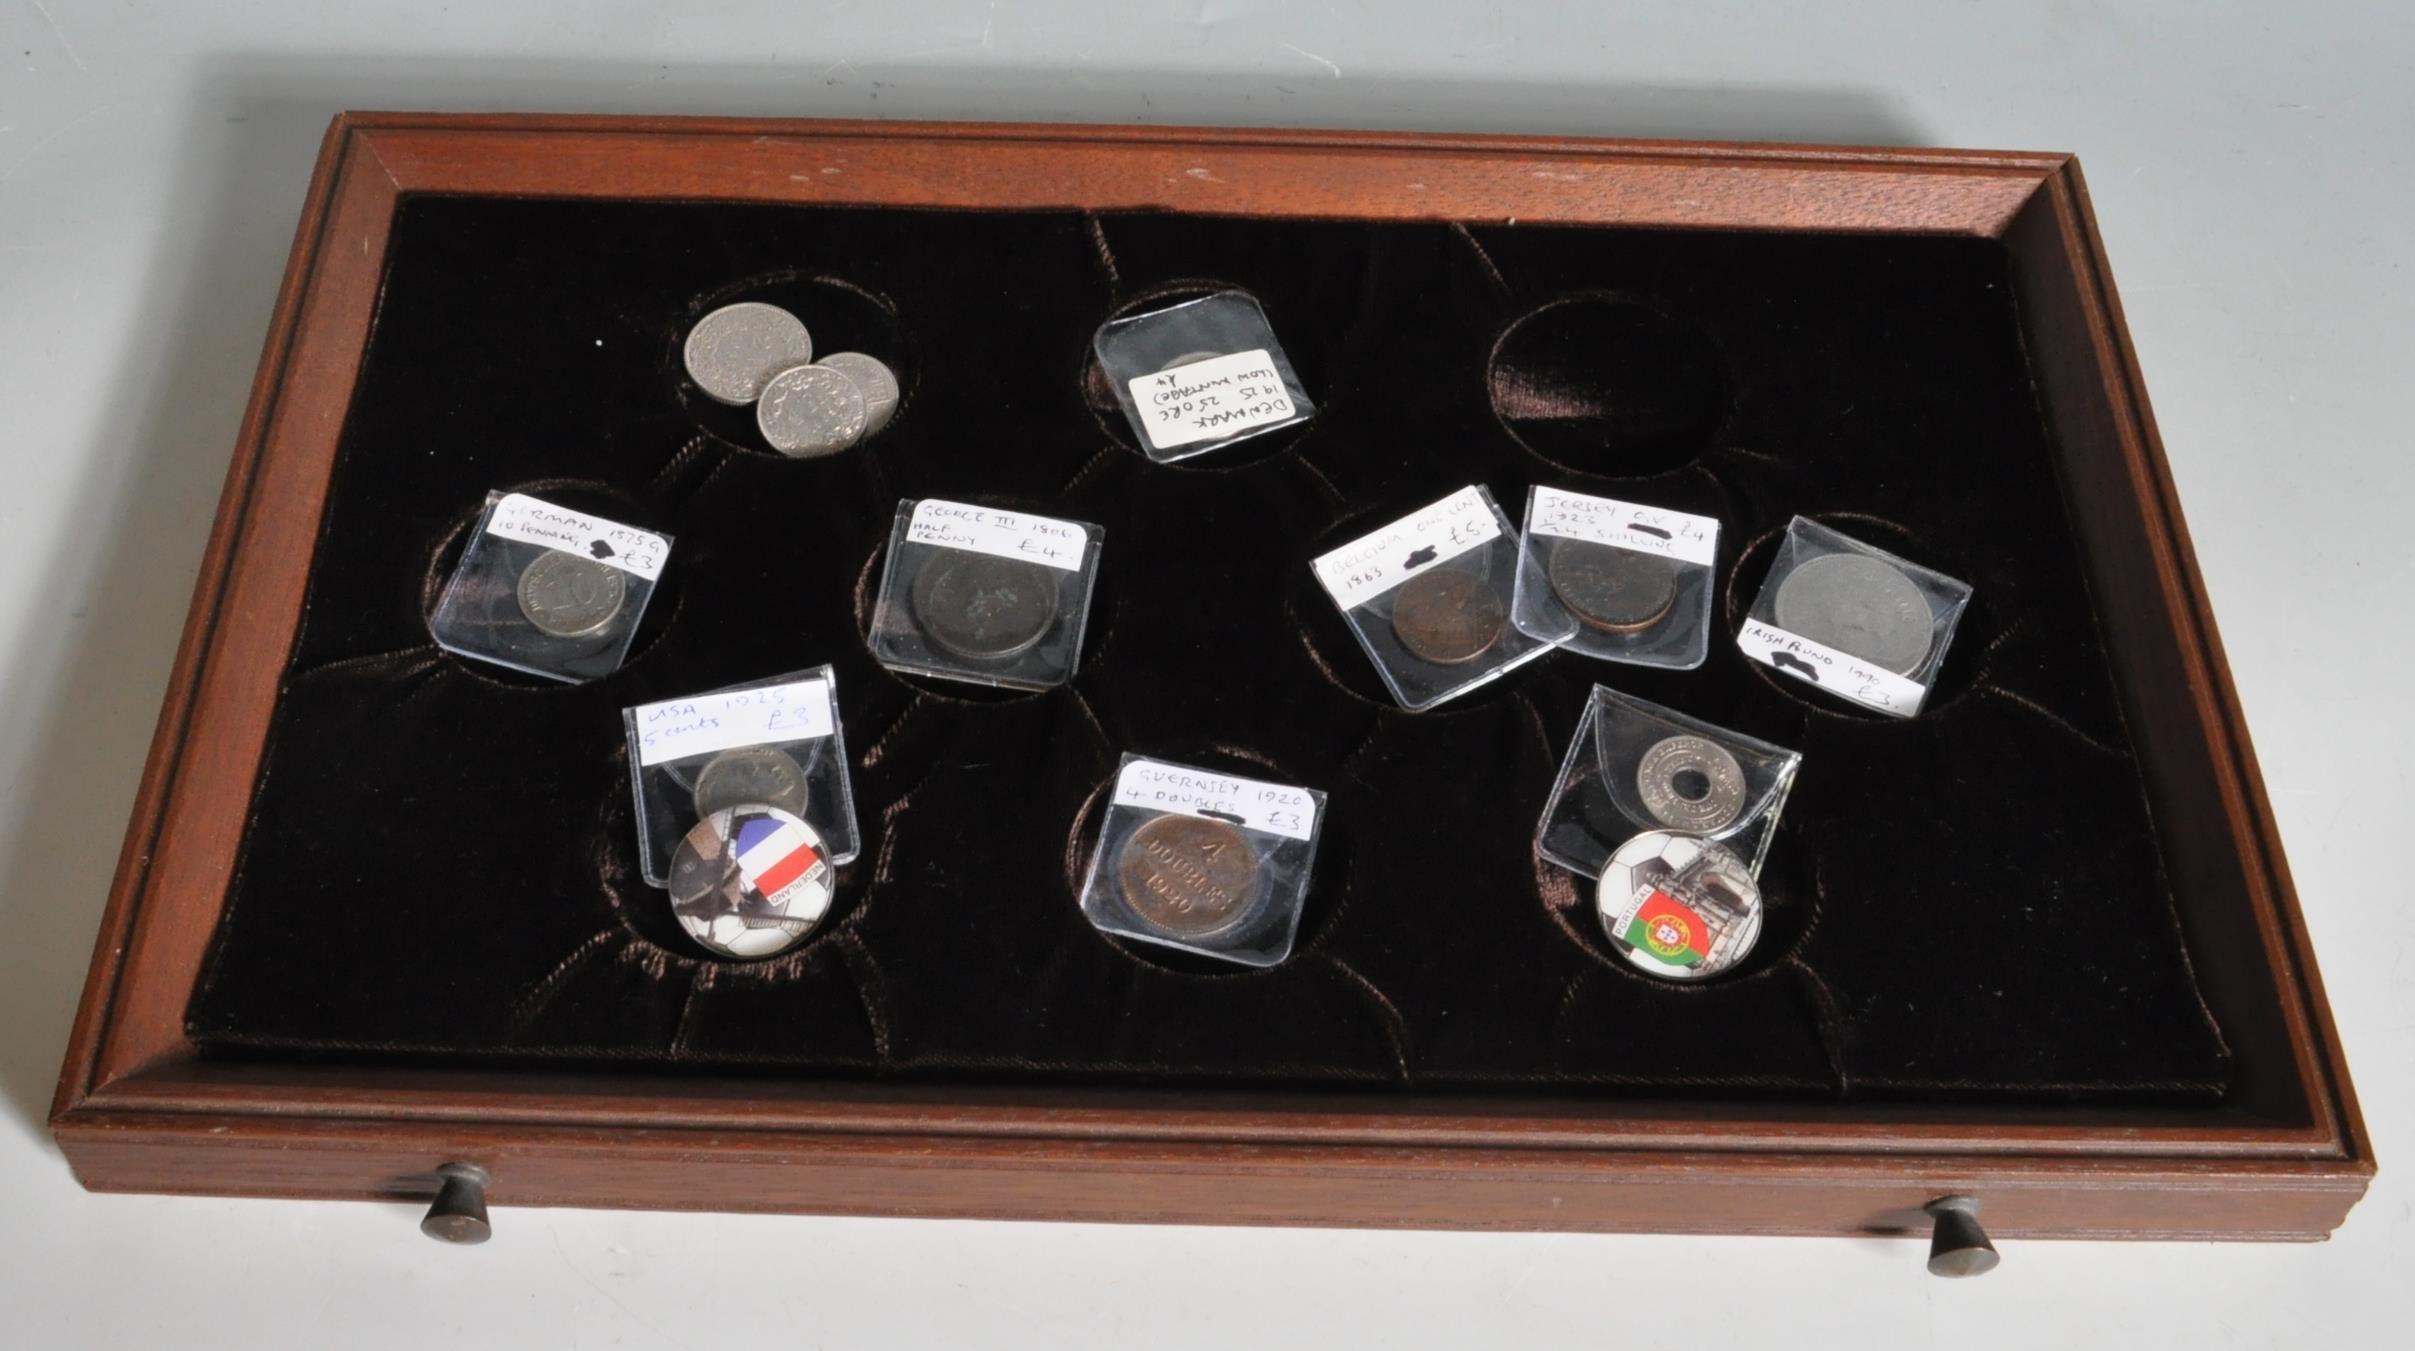 COLLECTION OF COINS AND MEDALS IN A WOODEN BOX - Image 10 of 11